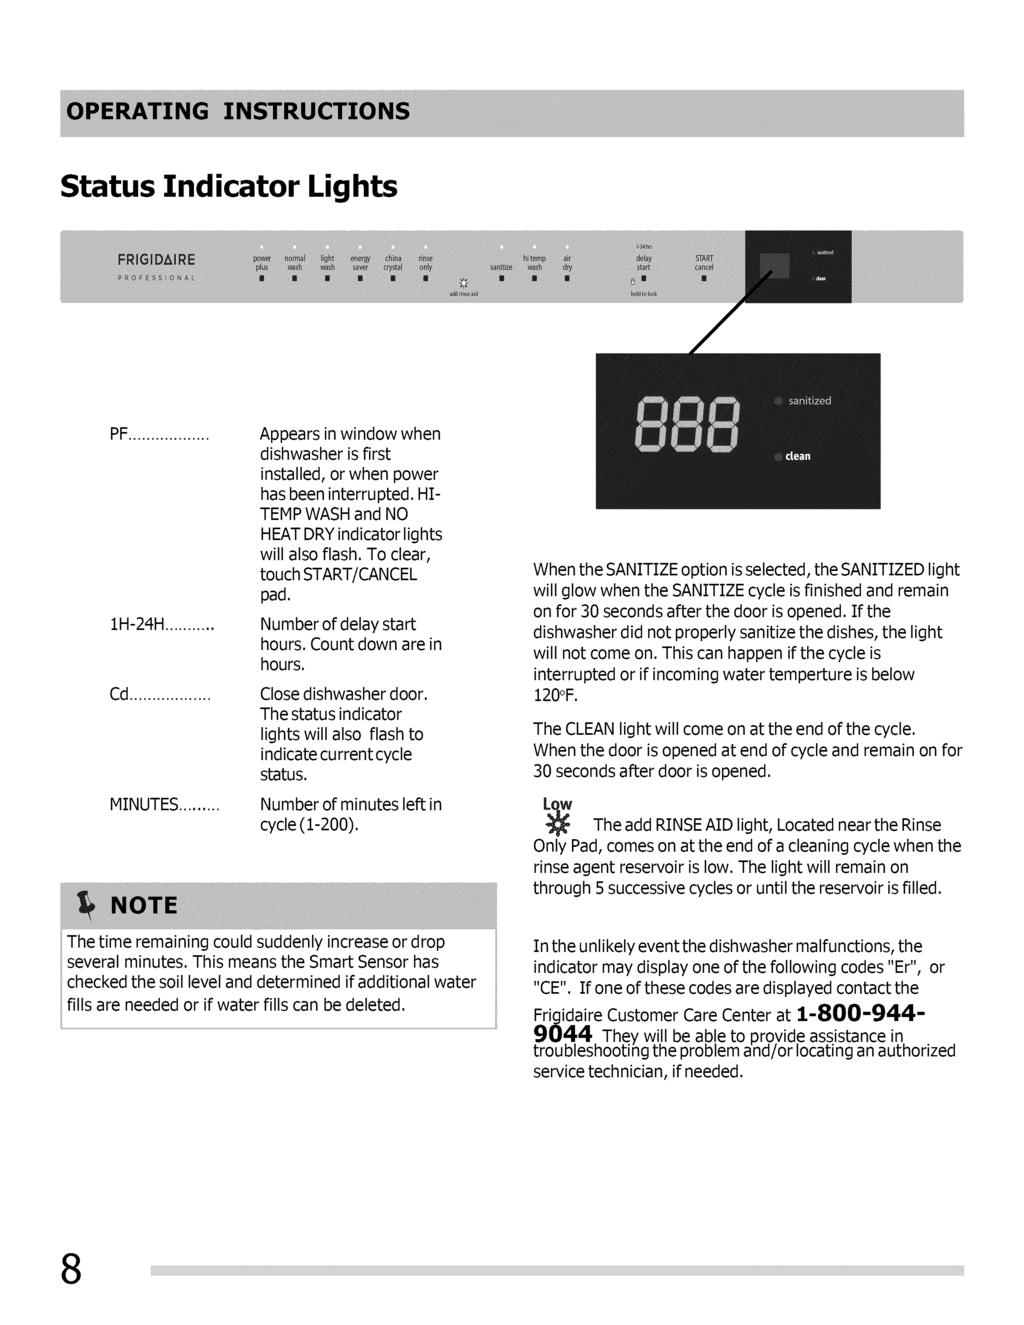 Status Indicator Lights PF... 1H-24H... Cd... MINUTES... Appears in window when dishwasher is first installed, or when power has been interrupted.